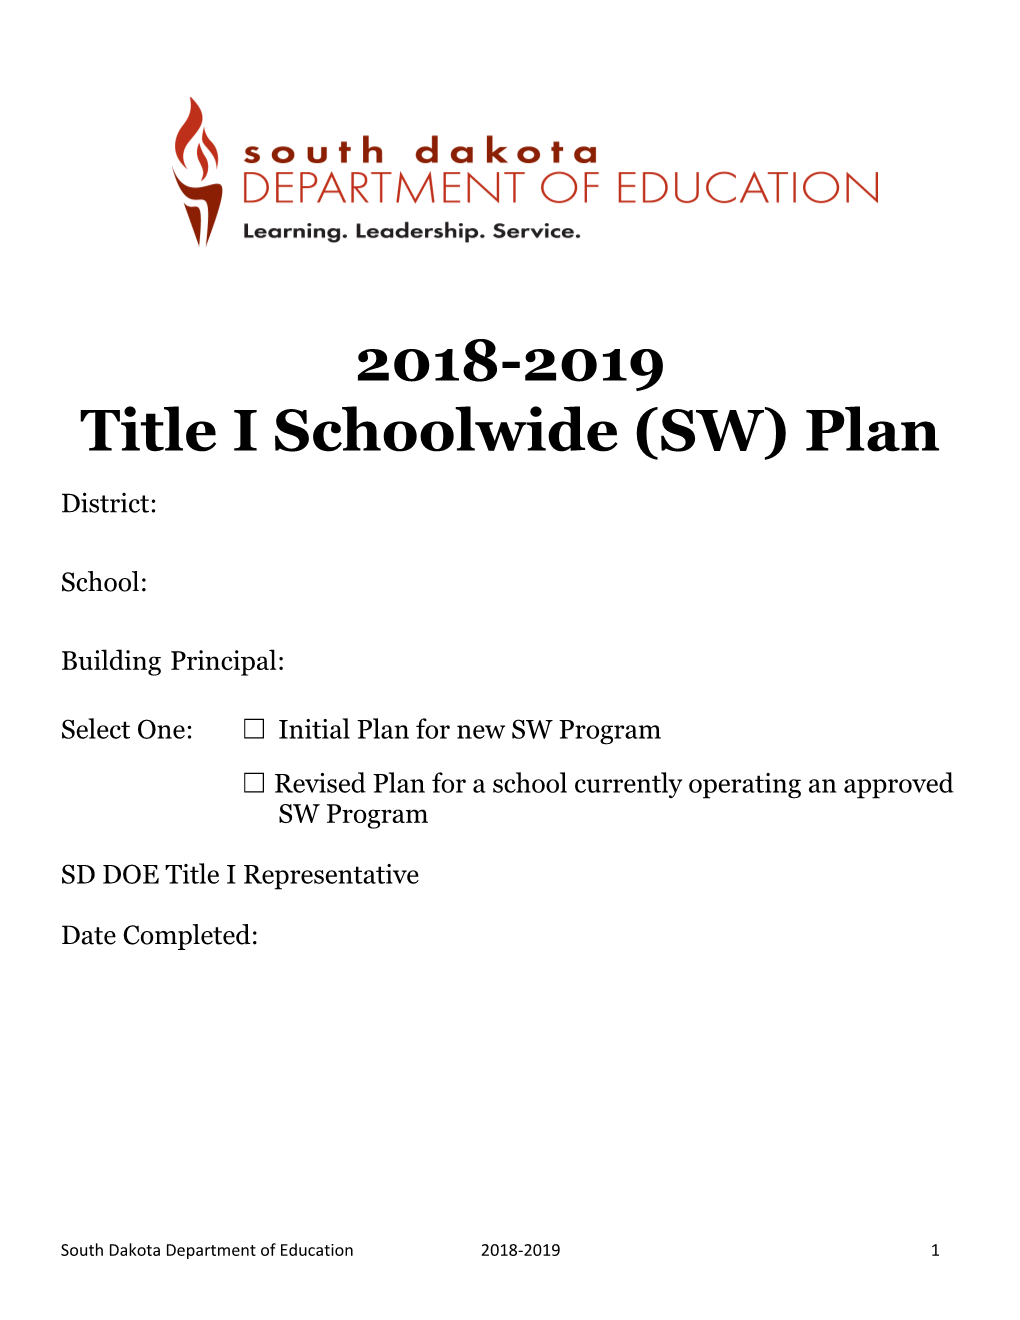 Select One: Initial Plan for New SW Program